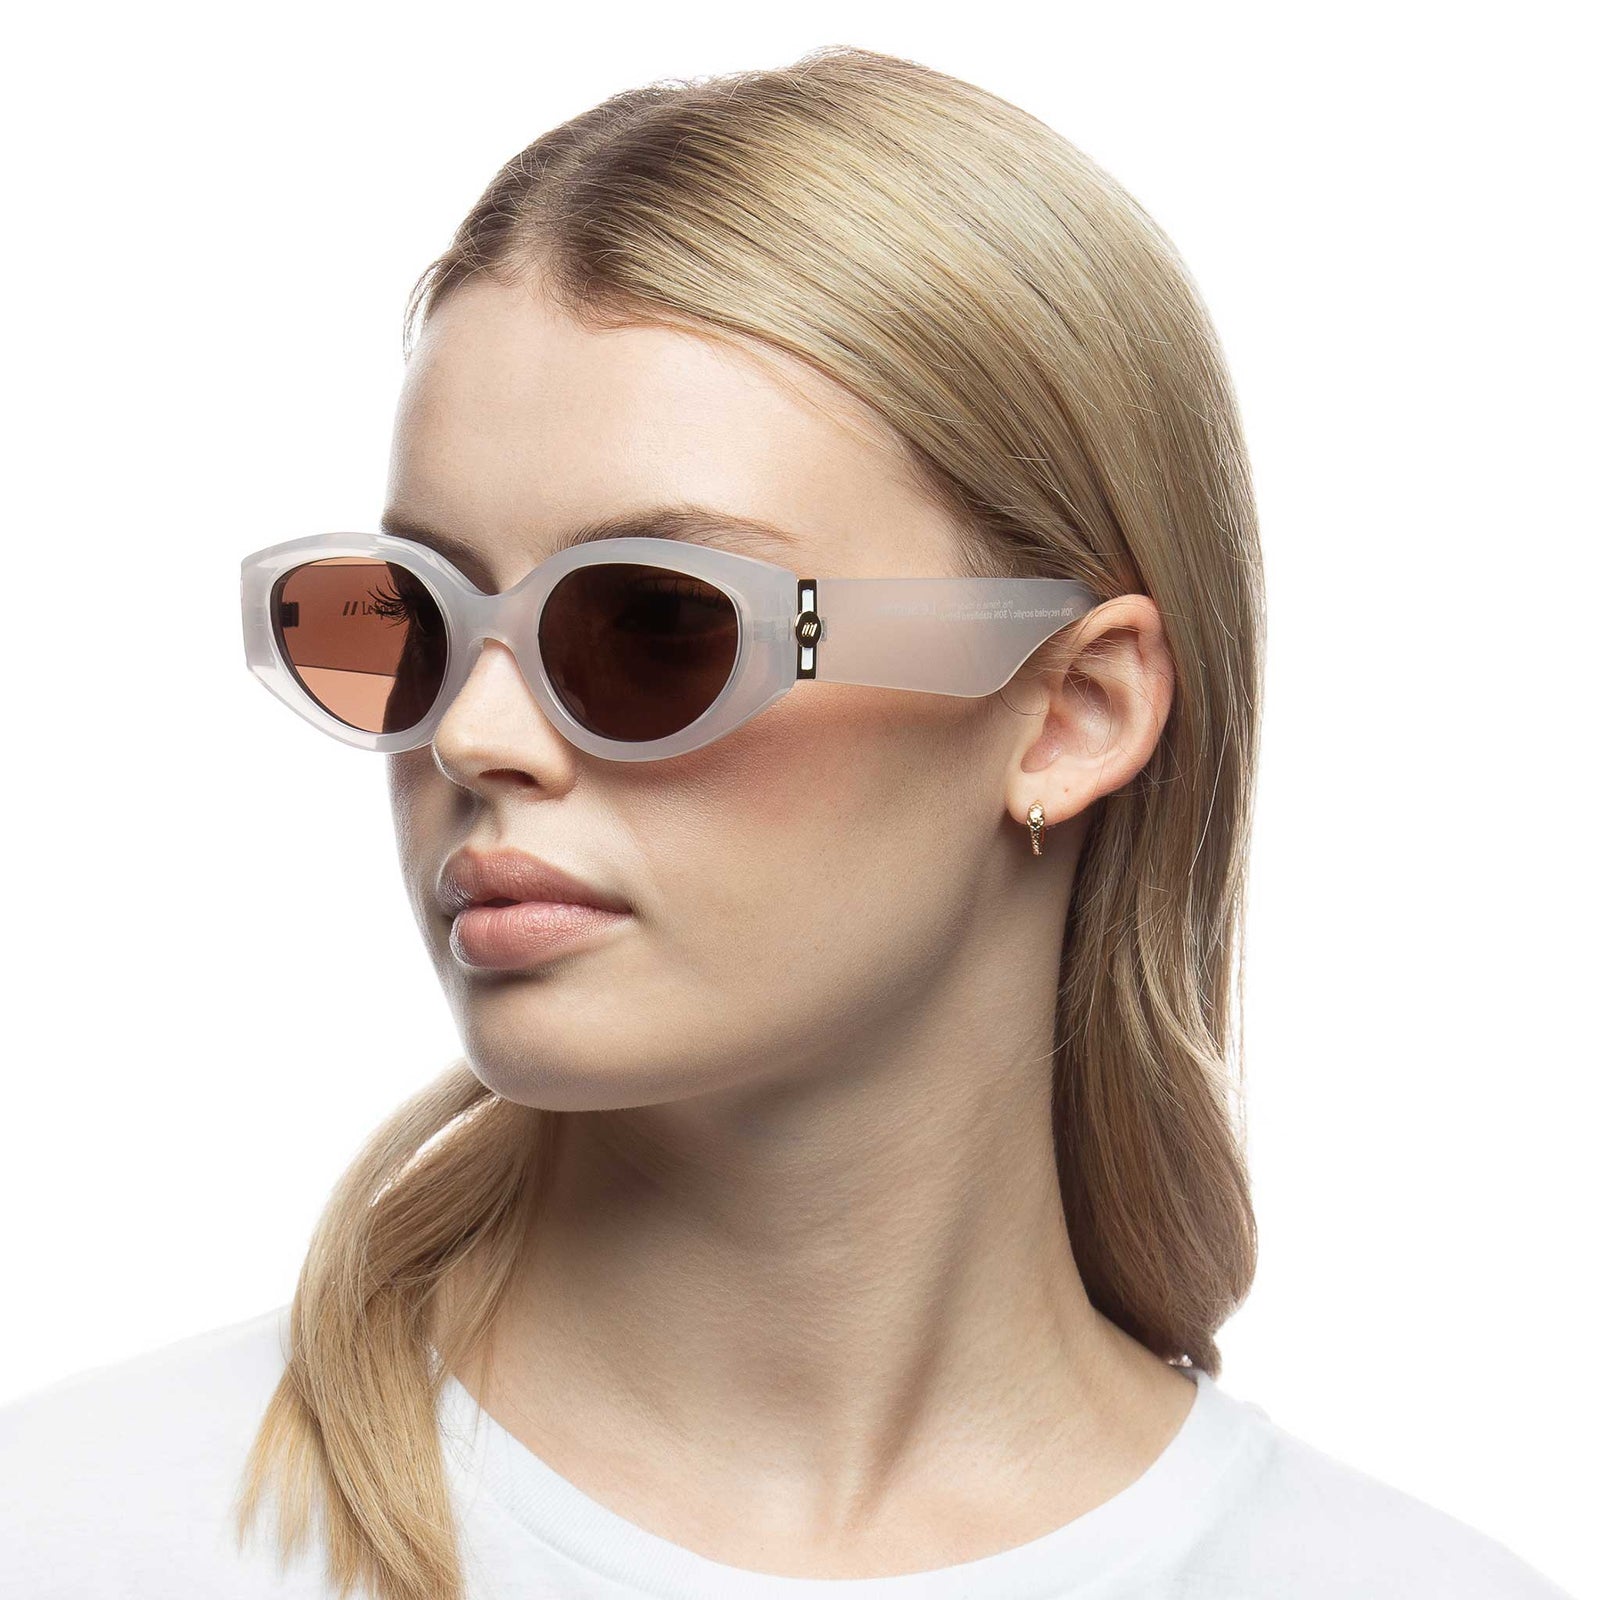 The Celine Oval Sunglasses That Are All Over Insta Right Now